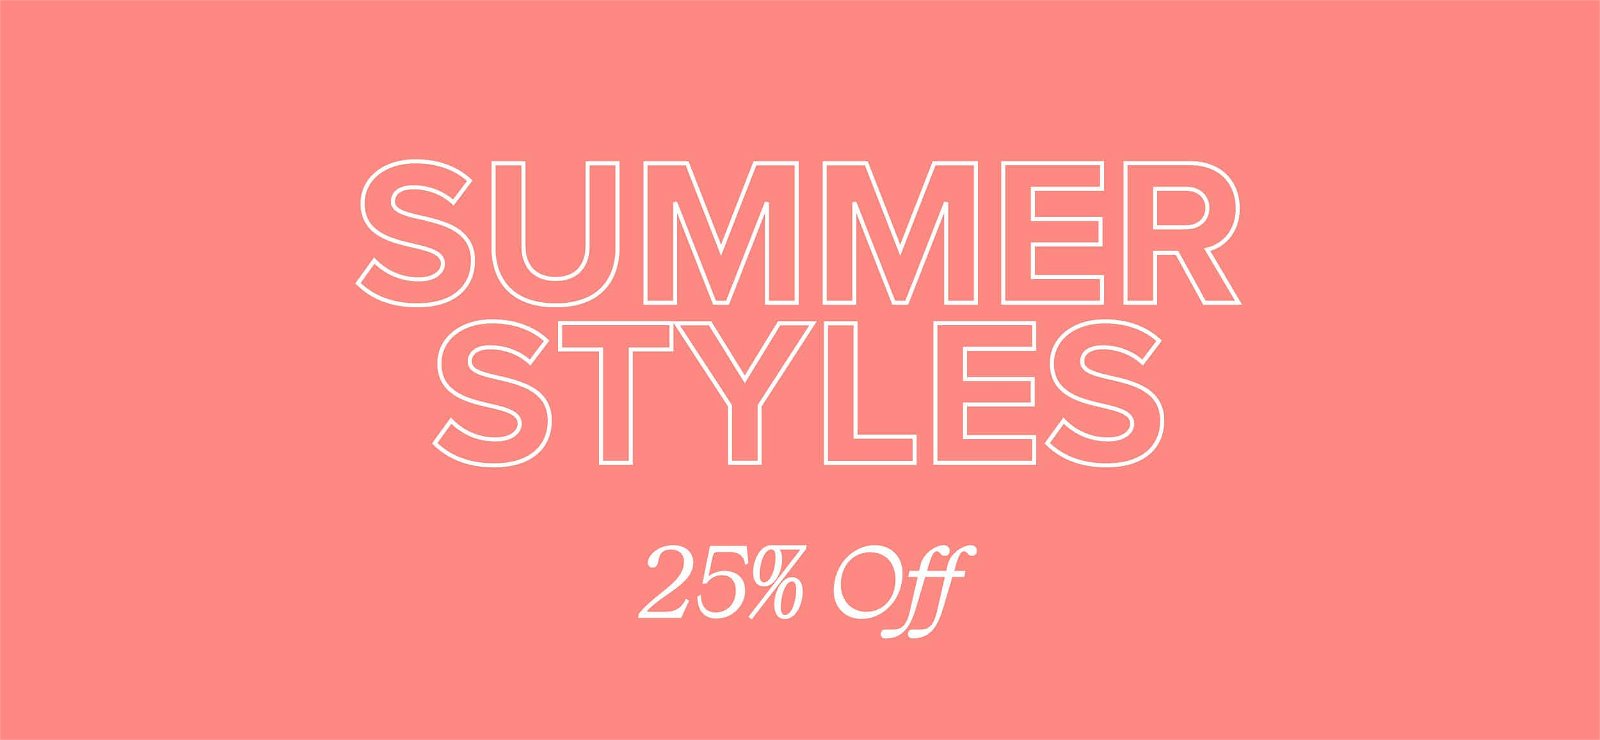 Shop Summer Styles with 25% off